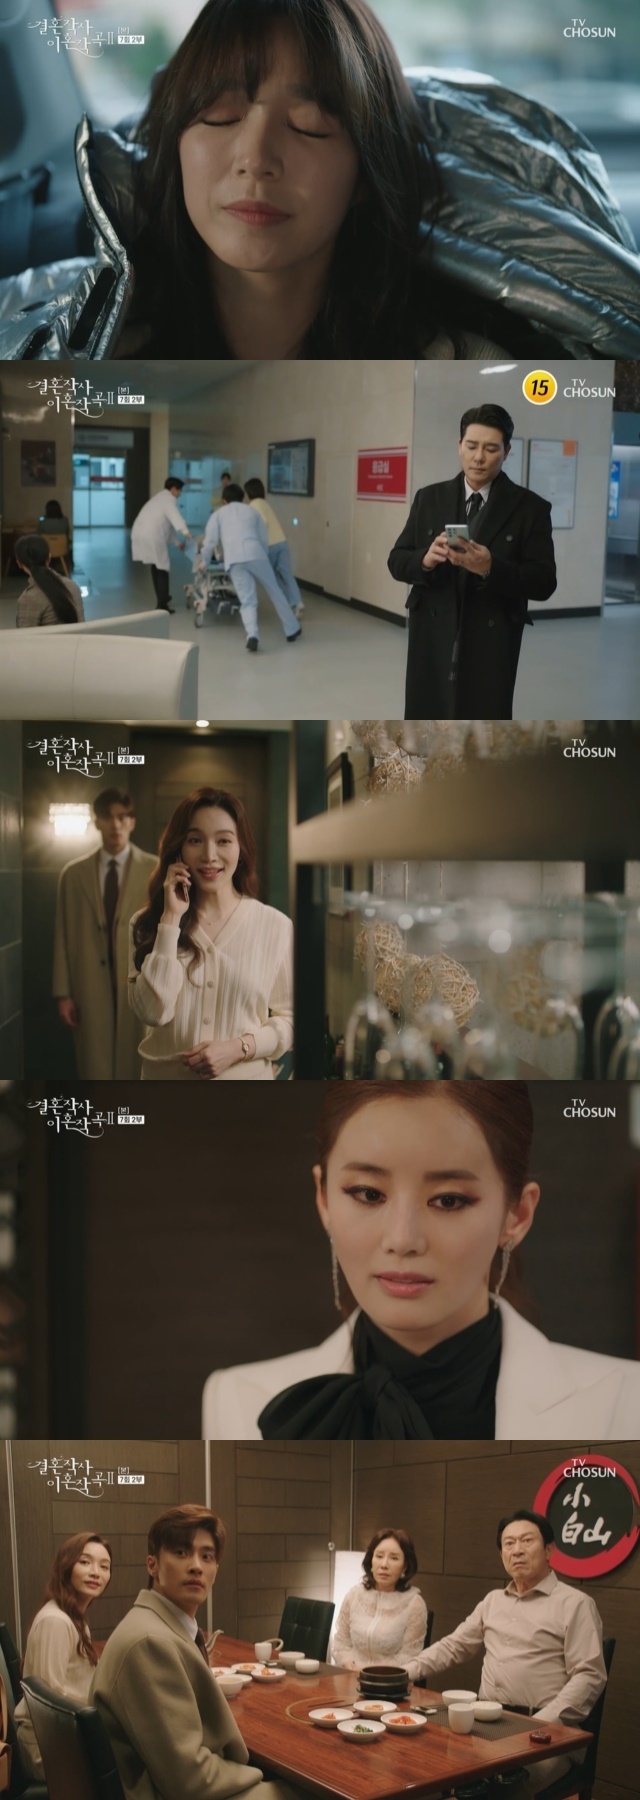 Lee Ga-ryung finally faced affair woman Lee Min-young with Lee Tae-gon and Song Ji-in parting ways.In the 7th episode of the TV Chosun Saturday drama Marriage Writing Divorce Composition 2 (playplayplay Phoebe (Im Seong-han), directed by Yoo Jung-joon, Lee Seung-hoon), which was broadcast on July 3, the daily life of married couples stained by affair was drawn.On this day, Shin Yu-shin (Lee Tae-gon) escaped the crisis of being caught up in an affair with Safi-young (Park Joo-mi), who suddenly came, because Amy (Song Ji-in) left the horse riding hall with an unscheduled managerial meeting.After that, Shin Yusin went back to Amys house, pretending to be sick and going to the sauna, which was for the purpose of organizing the relationship.Shin Yusin said, The reason for the breakup is for Amys Actor job. If we start work in the middle of the day, we may not be able to open our dreams.I do not love Amy, Shin said. If I do not love, would I have met time?Shin Yu-sin left and gave Amy a car. Inside the car was the last message Shin Yu-sin had left for Amy.If we have no change in our minds after two years, Amy will come running when she finds me, and Do not forget that the soul is together. I love you.Amy cried in the car and this was witnessed by Cho Woong (Yoon Seo-hyun). Meanwhile, Shin Yu-shin bought snacks for Safiyoung and Kim Dong-mi, and pretended to be a friendly head.As the song won (Lee Min-young) became more and more popular, So Ye-jung (Lee Jong-nam) began to deceit his son, Judgyeon (Sung Hoon), and his daughter-in-law.He tells the judge that he is meeting with song won, (song won) is happy even if it is hard. I want to love you when I see such things.If a woman has a boy who does not love her, her face can not be good. The benefit of the sea mother was constantly told to send a picture of the thief. So-jung said, Do not do it.Then Ill tell you what, its a boon. So, he said to song won, I talked to Sahyun for a while.I want to come to the chimney, he said.The house of song won also came to Panmunho (Kim Eung-su), who was worried about the fight with So Ye-jeong, and Song Won gave him a slight signal that So Ye-jeong was home.And as soon as Panmunho came, he said, I did wrong. I will ask for forgiveness until you are relieved. I did not know that I was grateful and I was proud.The couple respect each other and are personality equal, but I am ignorant. In the end, So-jung accepted Panmunhos apology and returned home together.After that, Panmunho and Sojeong accompanied the obstetrics and gynecology examination of song won and ate.Panmunho promised not only small-sized but also song won, as well as a daughter-in-law, saying, I will do the hearts of these two women.They then suggested to Song Won that they should be at their home. Their concern for the benefit was only a moment.At this time, the judge also found the restaurant and witnessed the song won by chance. The judge immediately ran to the song won and cried with excitement at the boat called.Judge Hyun joined the meal place when he said that the party of song won was his parents.However, the problem is that Buhye-ryong also visited this restaurant and was naturally guided to the dining room.As soon as he opened the door, he was surprised by the sight, and instantly he felt that song Won was an affair.He approached song won and asked, Do you live in Nonhyeon-dong? And when the answer Yes came back, he hit the cheek of the judge.Then, he immediately ripped off the song wons hair and said, Is the whole family squeezed?Even in this situation, So-ye-jung was worried about the pregnant woman song won, saying, Do you have no eyes? Judge Hyun tried to send song won out of this position.Buhye-ryong, full of betrayal, tried to attack song won by breaking the glass bowl, but it was blocked by Panmunhos hand.Since then, they have moved to talk to each other, and in the process, Panmunho and So-jeongs song won continued to be taken care of, angering the vice-minister.When he returned home, he asked Song Won, I look old. How old are you? I was wondering how old you were and how old you had an affair with a married man.